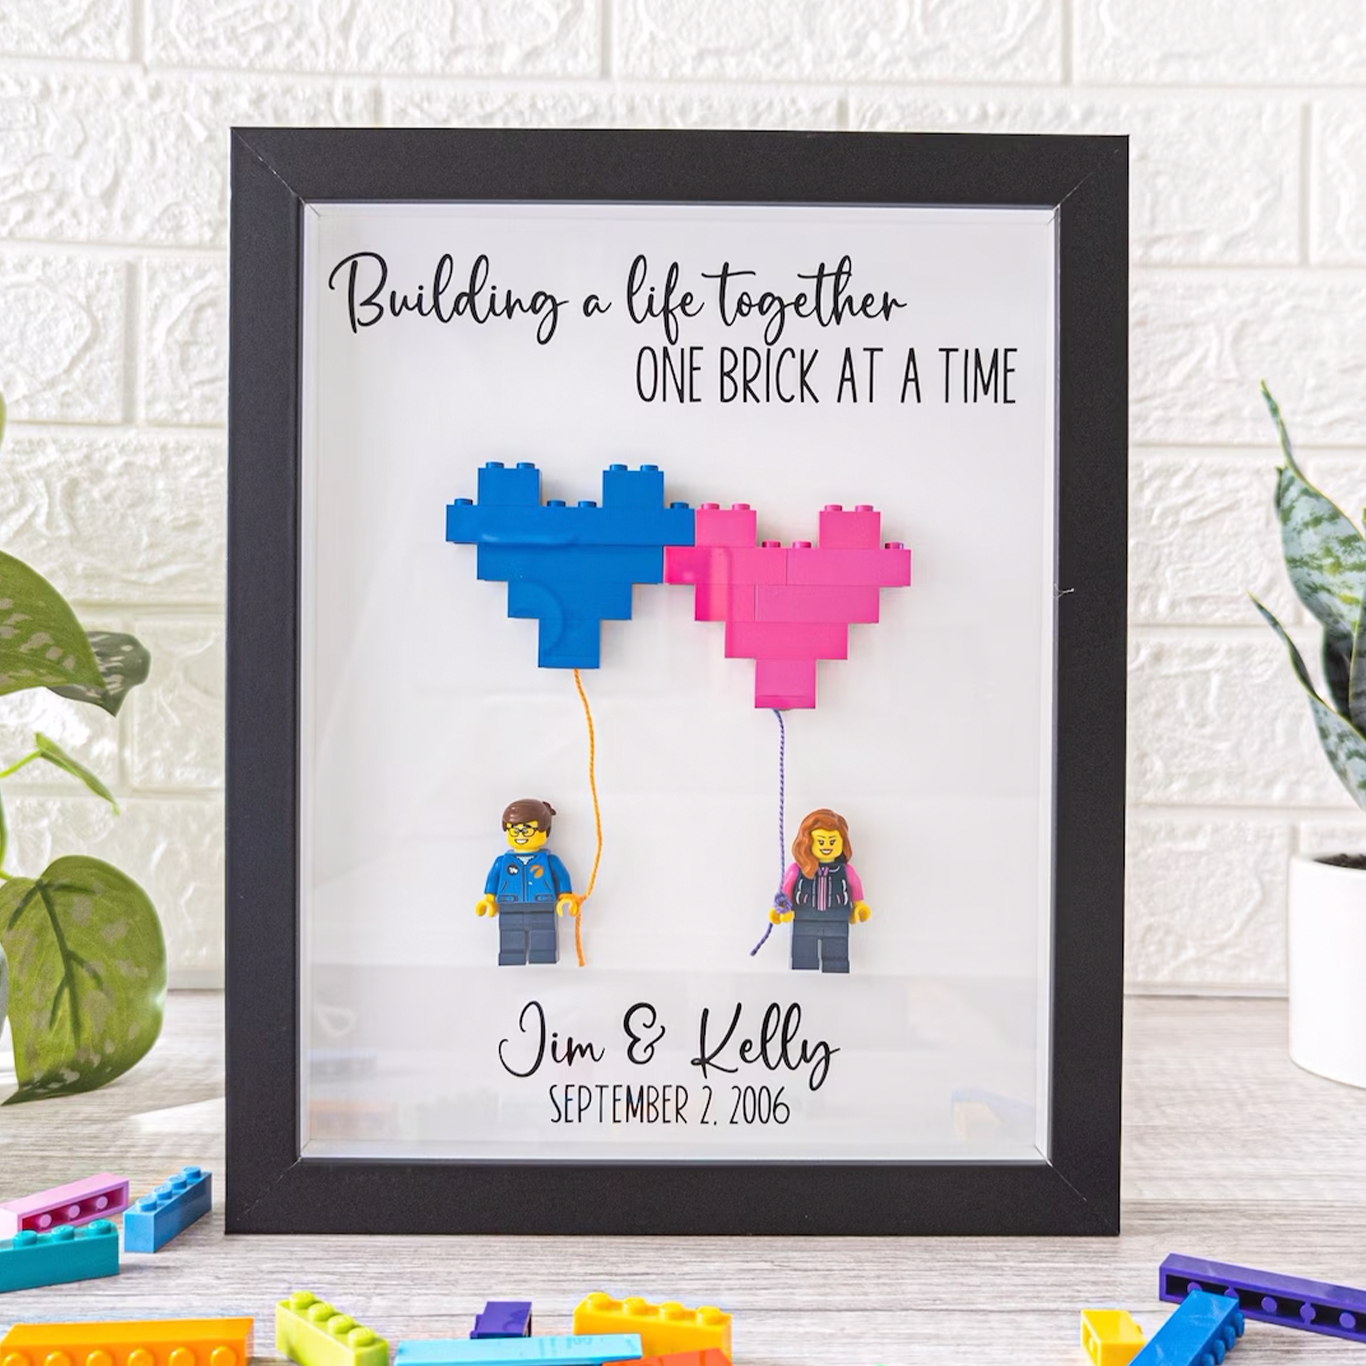 Personalized Mini Figures, Custom Couple Brick Figures Frame, Wedding Gift for Couple Unique Personalized, Unique Anniversary Gifts for Husband